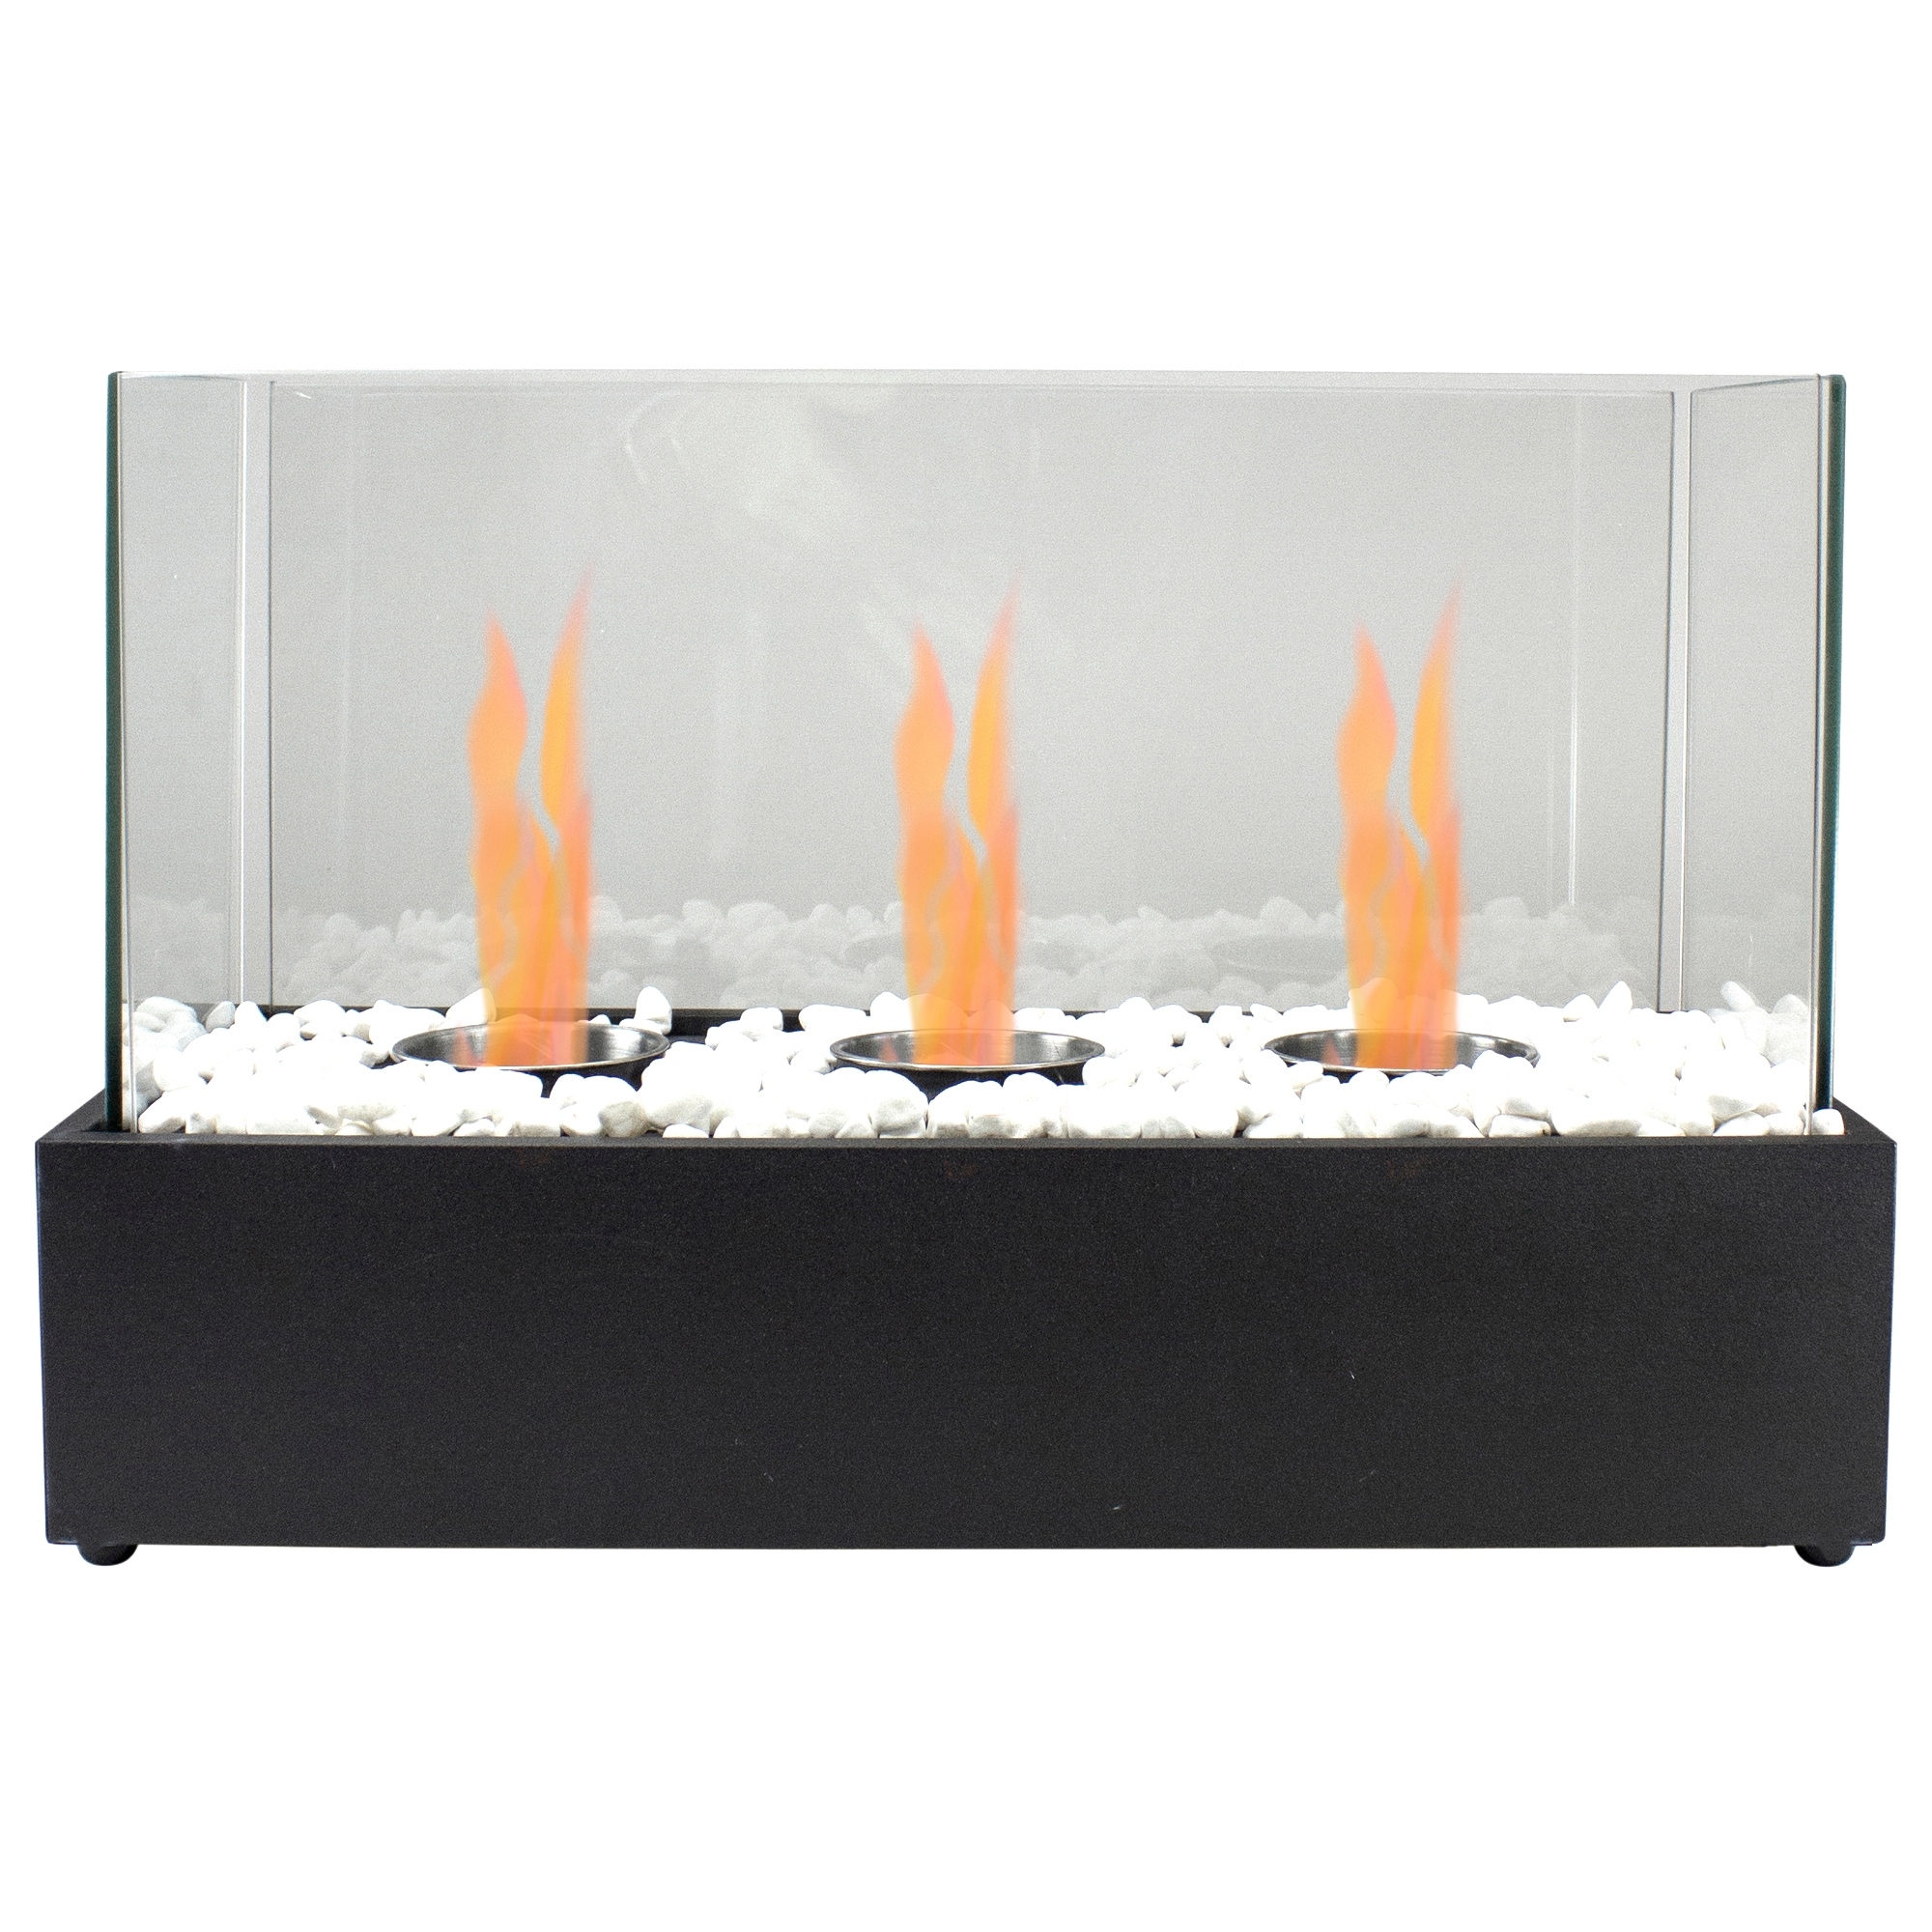 Northlight 17.75 inch Bio Ethanol Ventless Portable Triple Fireplace Flame Guard